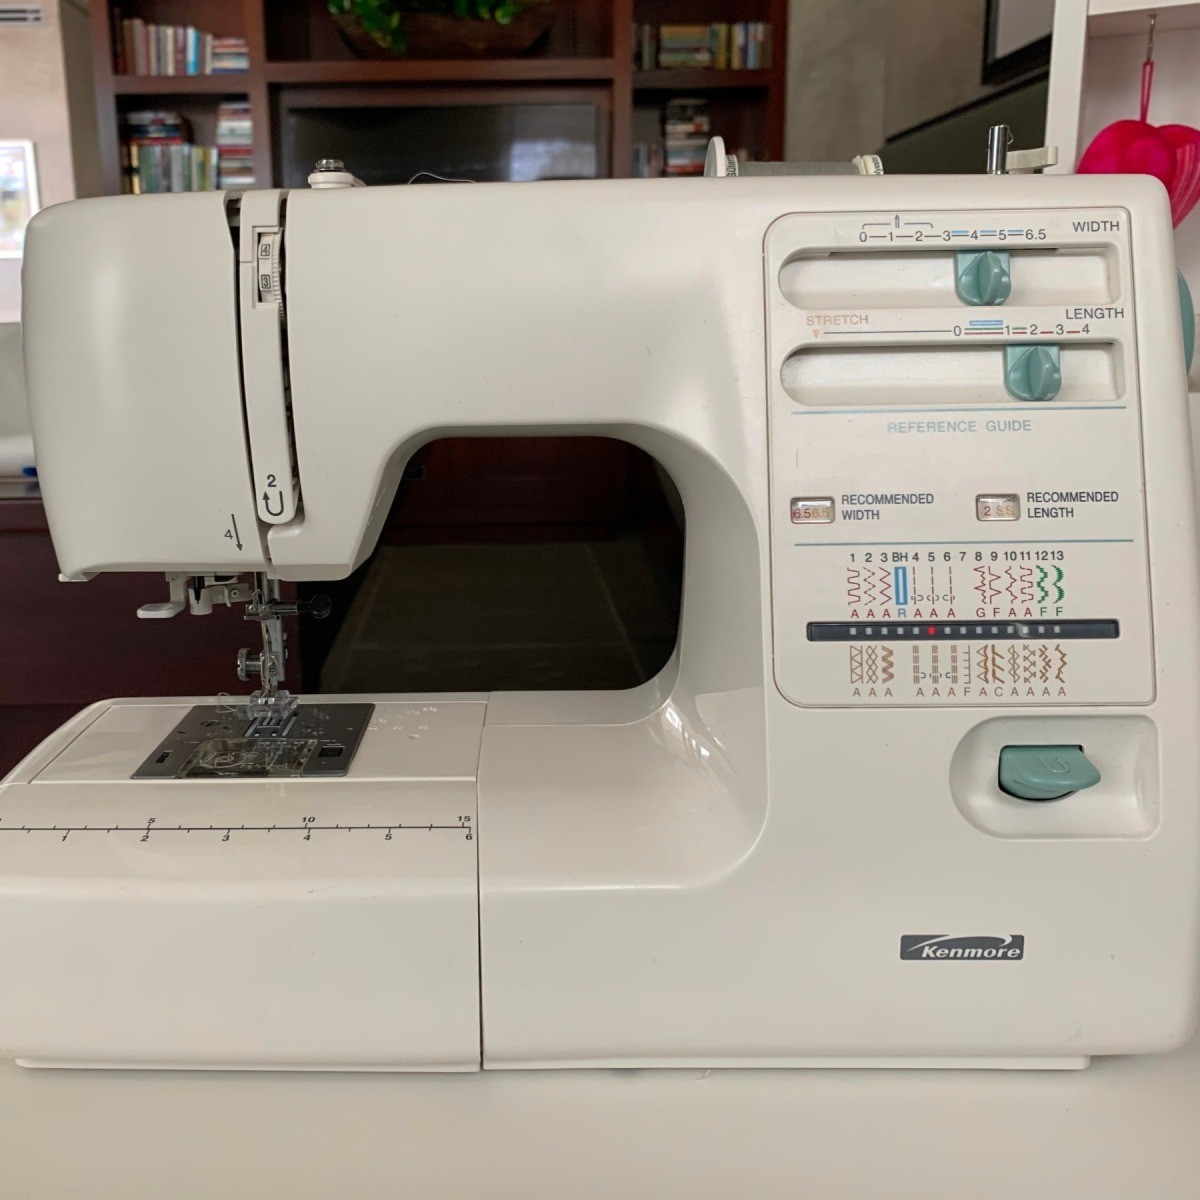 I have a Kenmore sewing machine model 835.16221. 